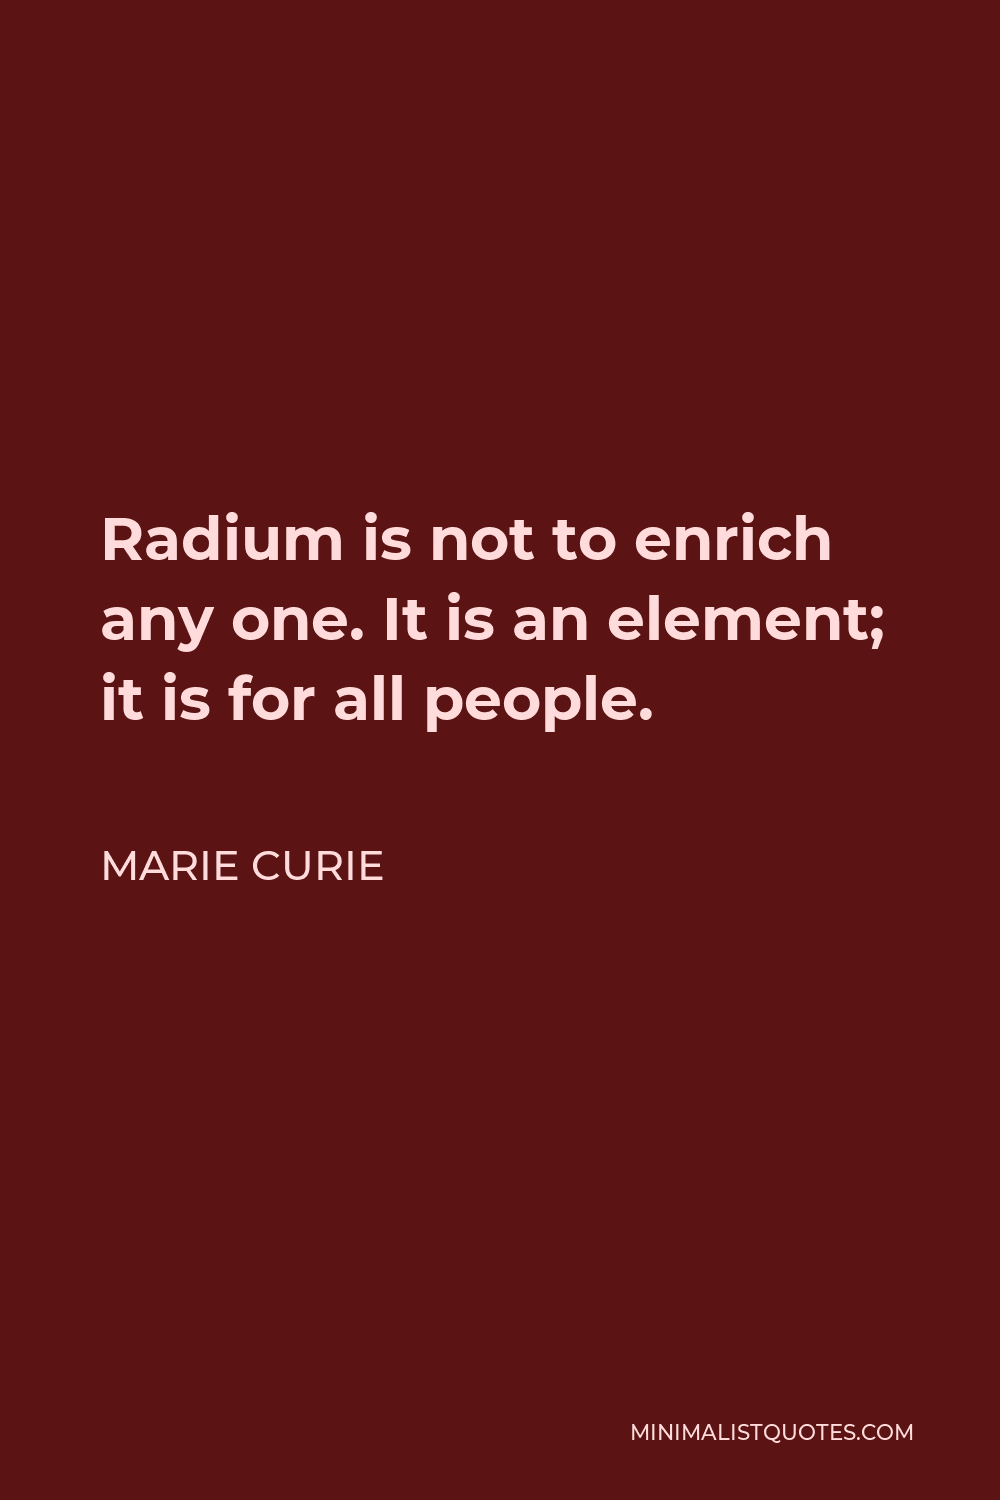 Marie Curie Quote - Radium is not to enrich any one. It is an element; it is for all people.